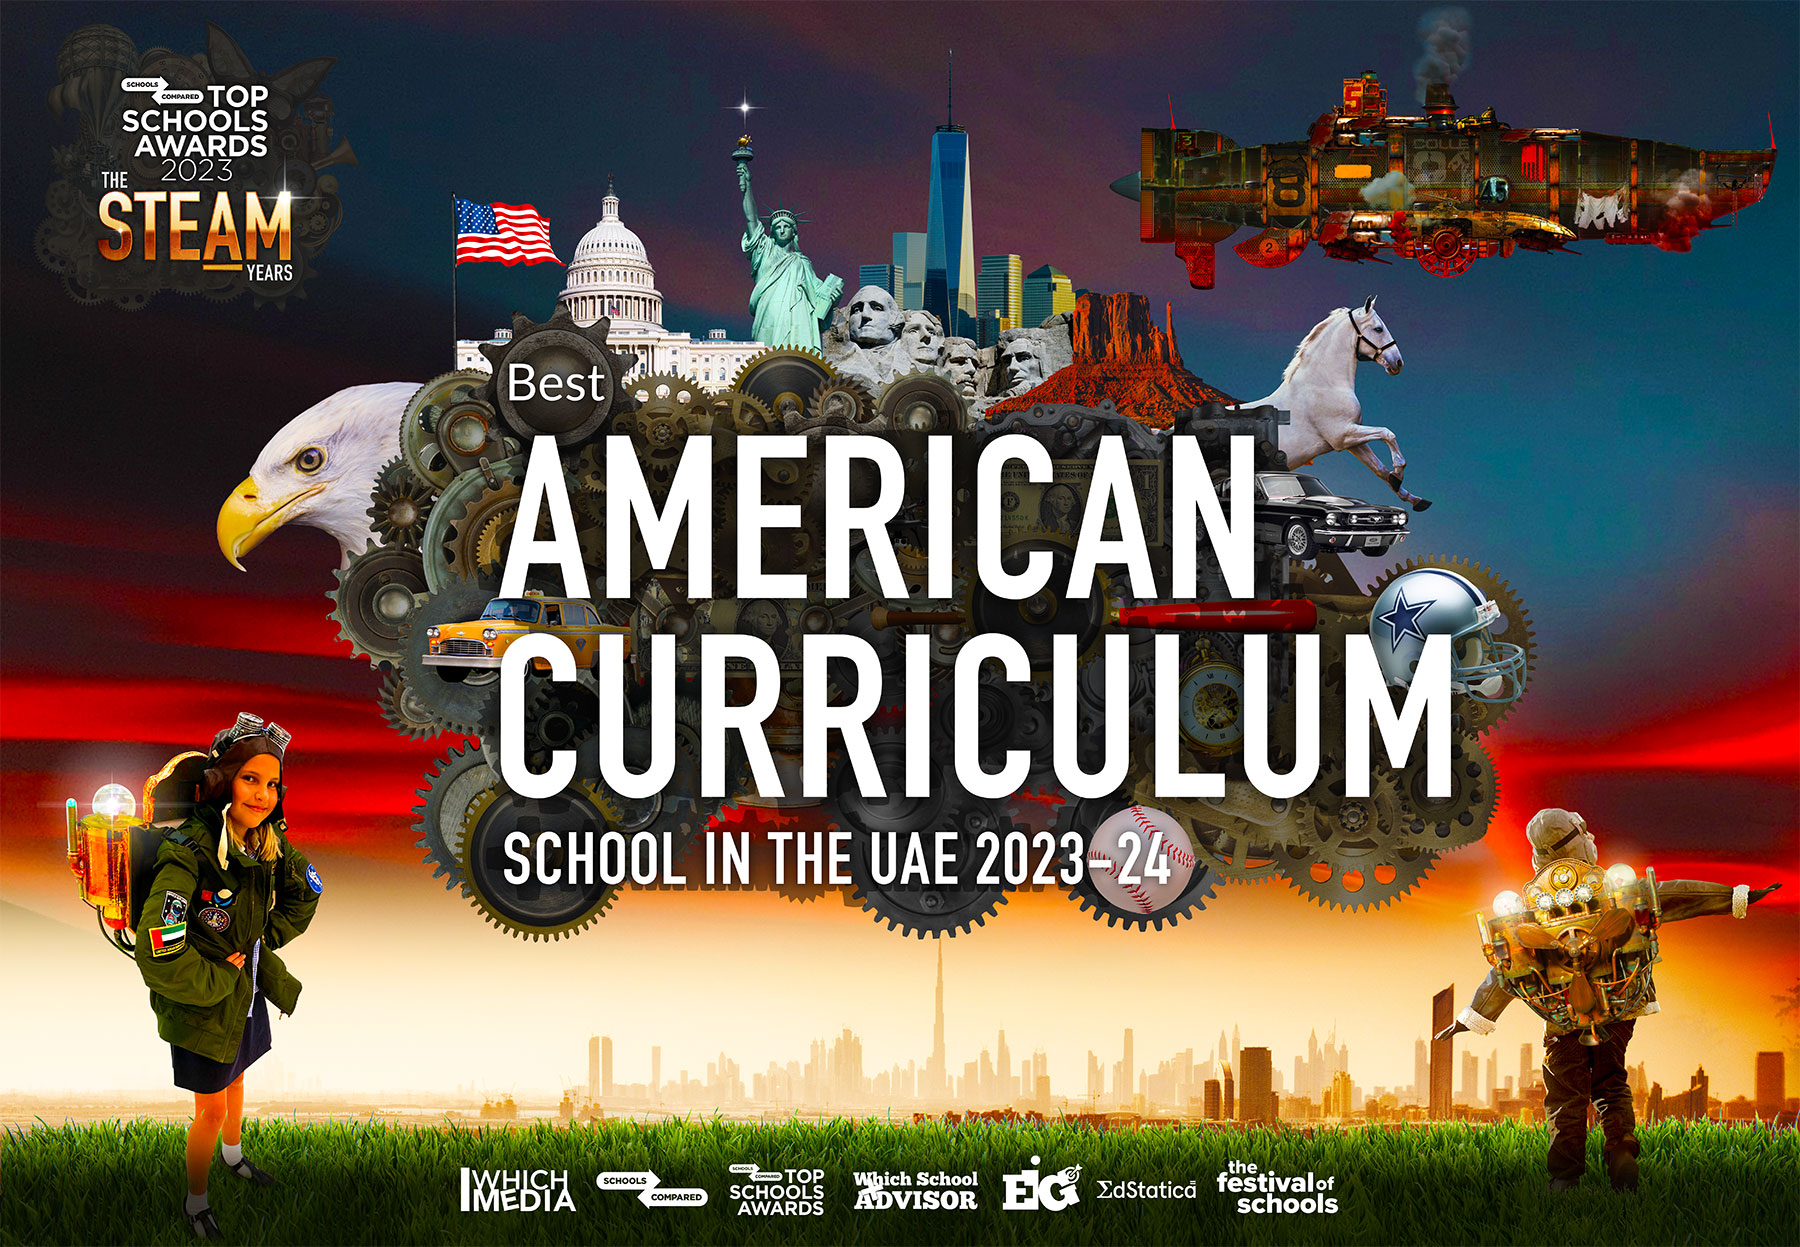 Top Schools Awards 2023 - Award for Best American School / Best American Curriculum School in the UAE 2023 - 2024. Main image shows a young girl and aspiring engineer from the British School of Al Khubairat engaged in testing a jet pack specially created for this years awards to highlights its focus on STEAM.